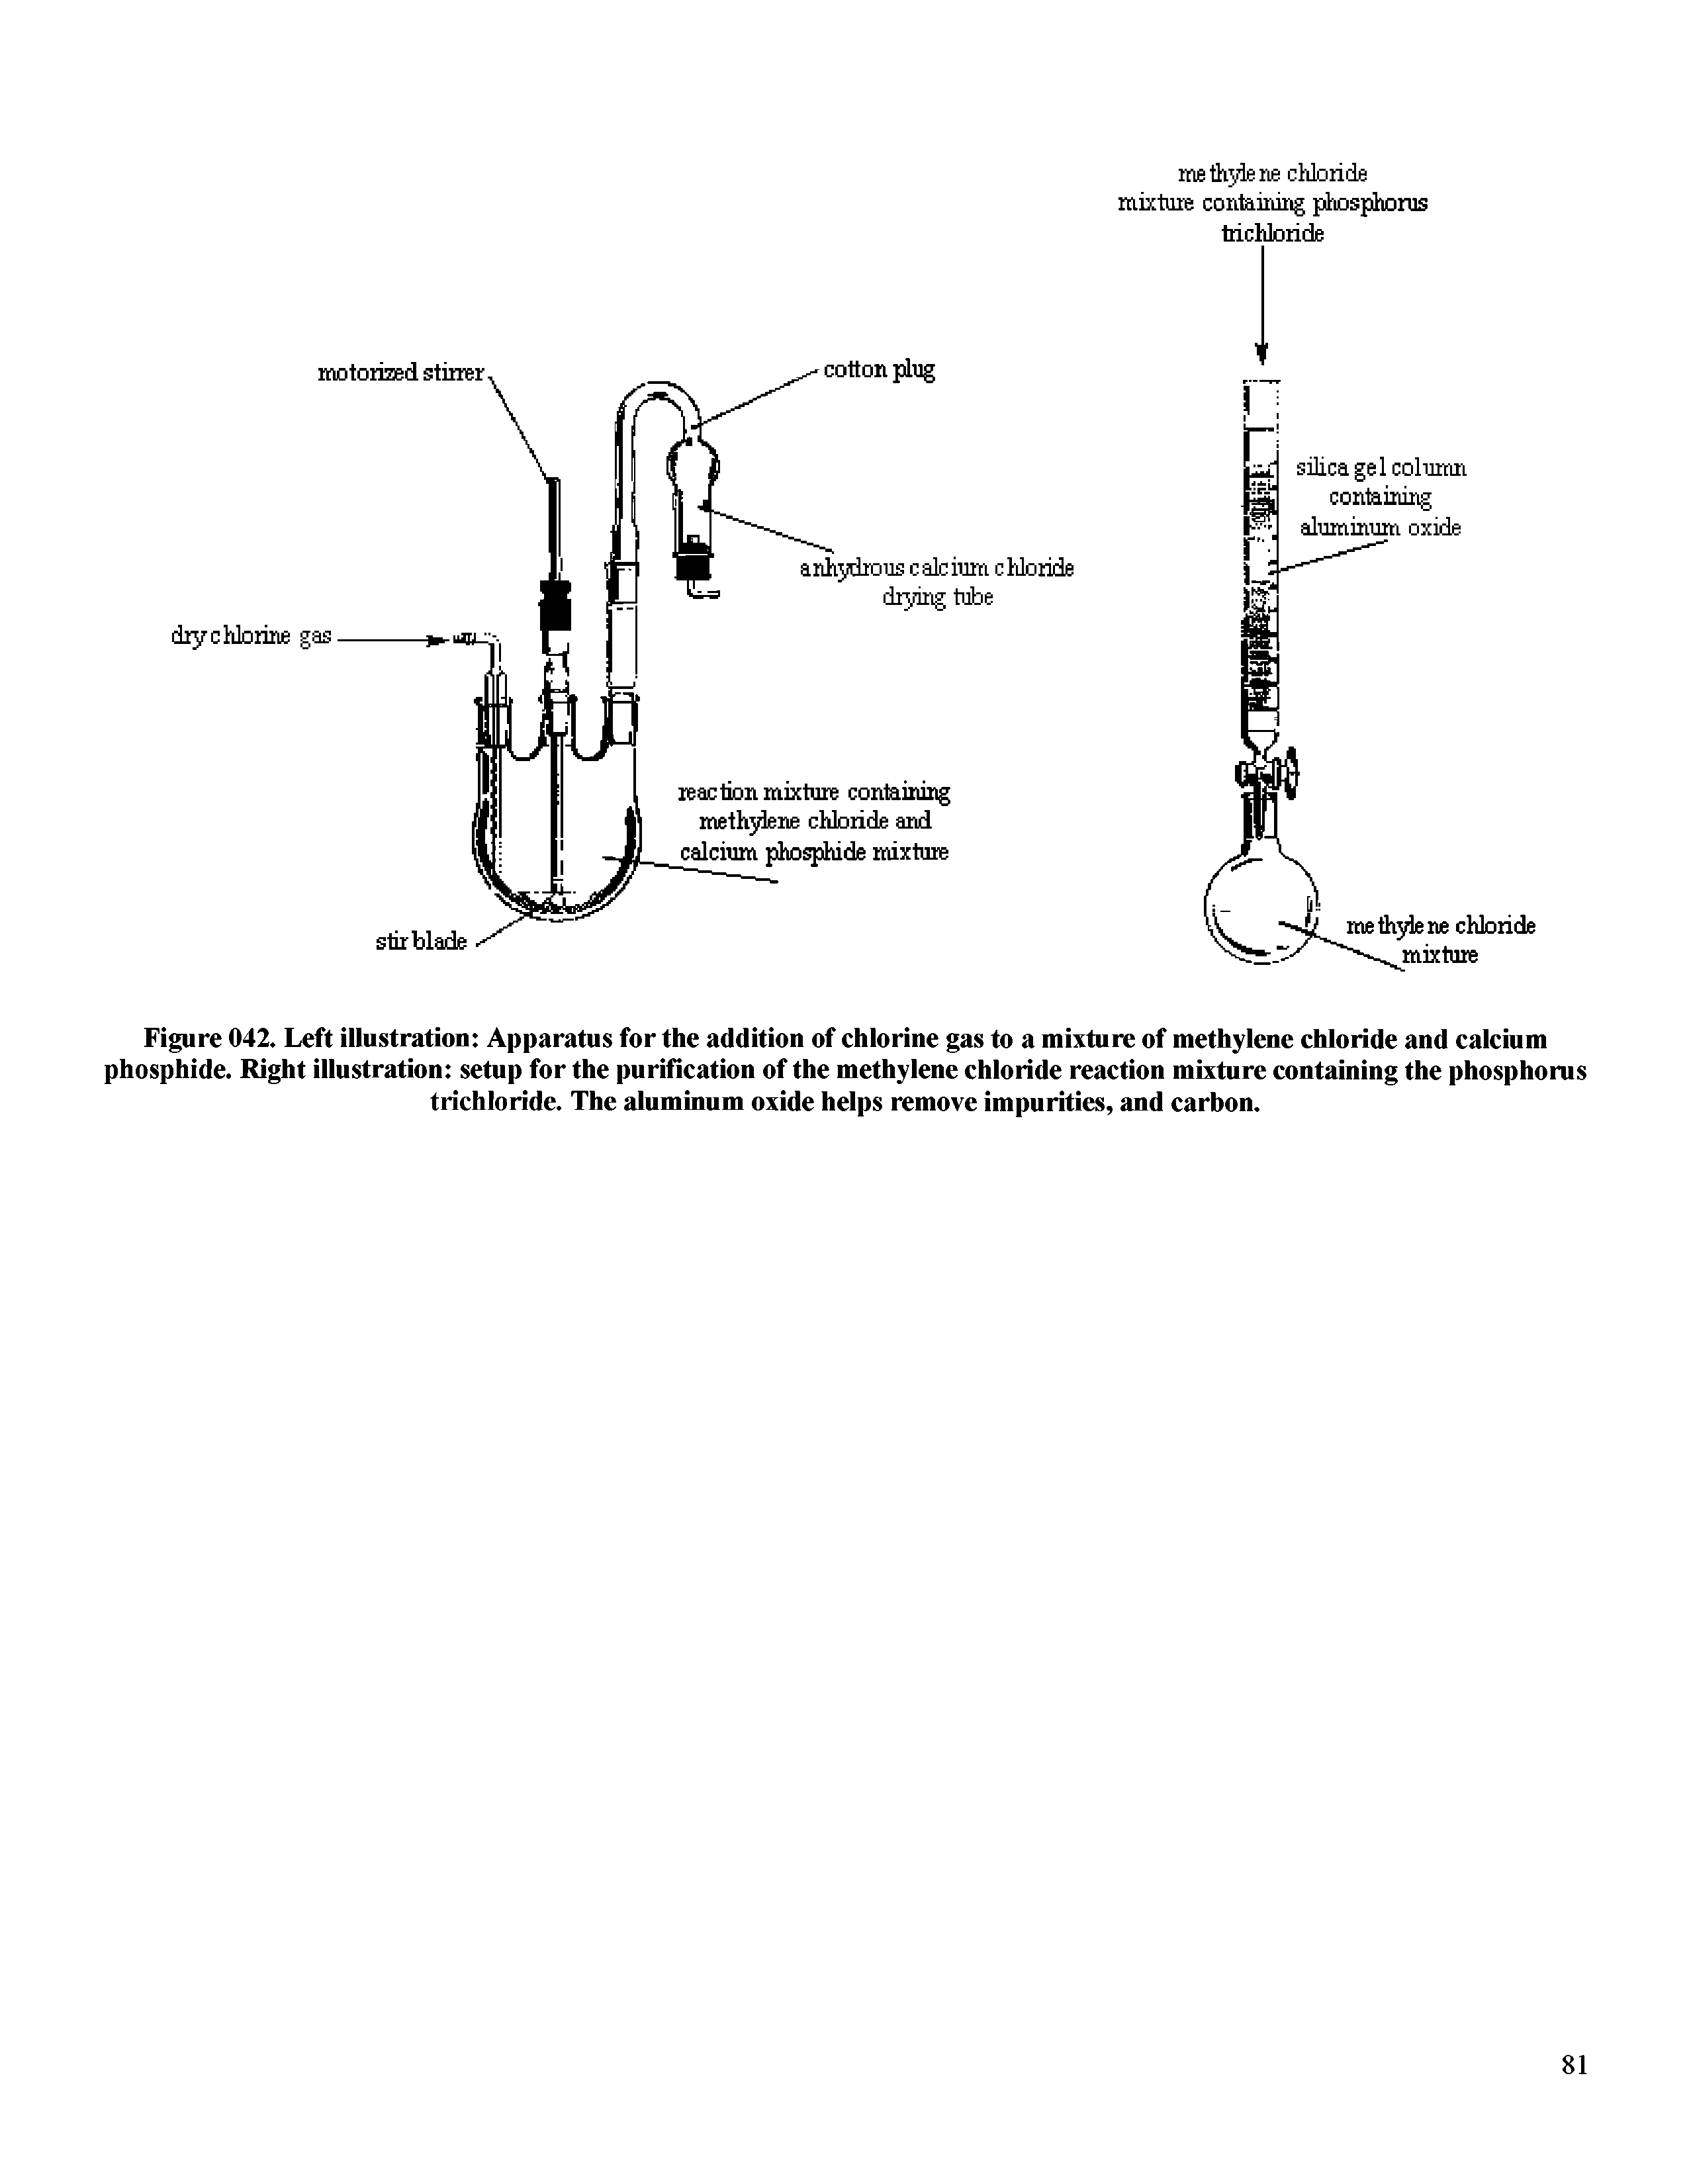 Figure 042. Left illustration Apparatus for the addition of chlorine gas to a mixture of methylene chloride and calcium phosphide. Right illustration setup for the purification of the methylene chloride reaction mixture containing the phosphorus...